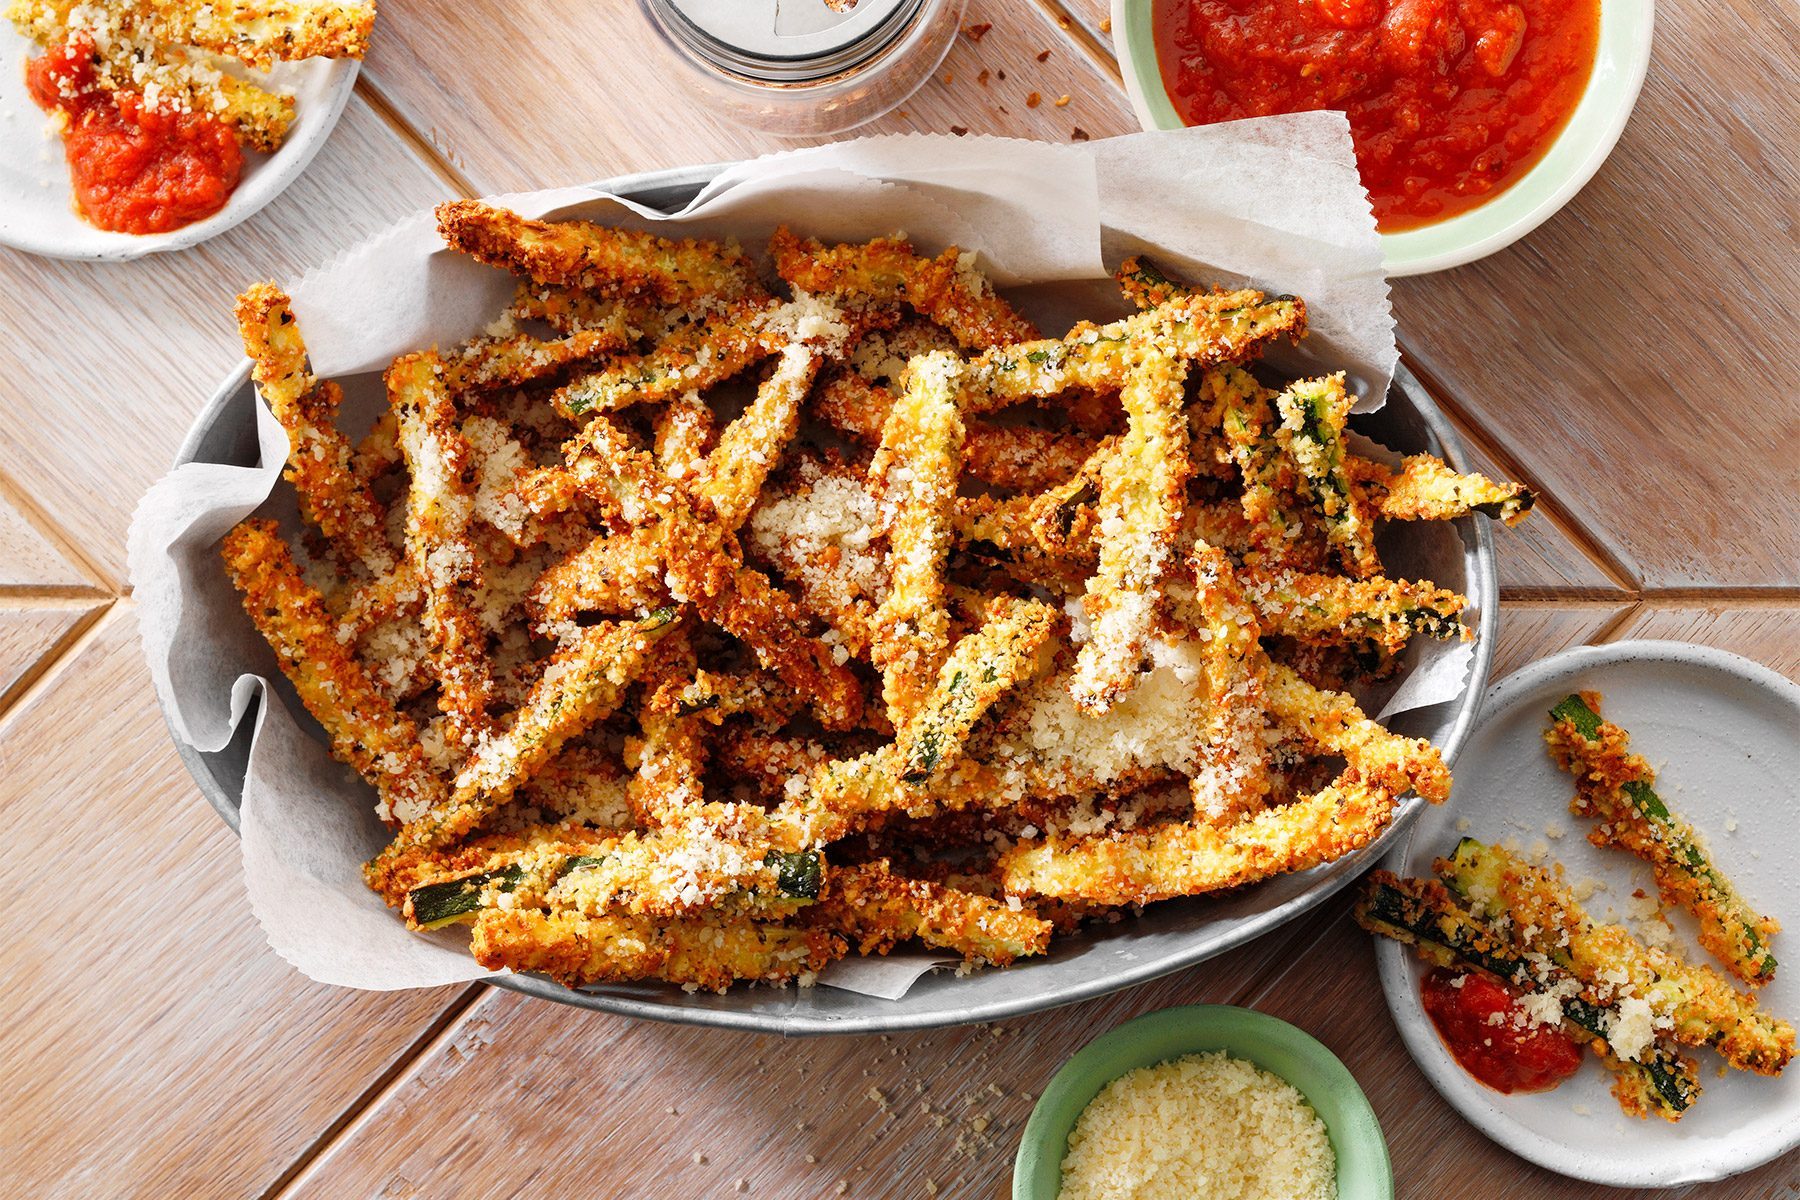 Zucchini Fries served on platter with dips